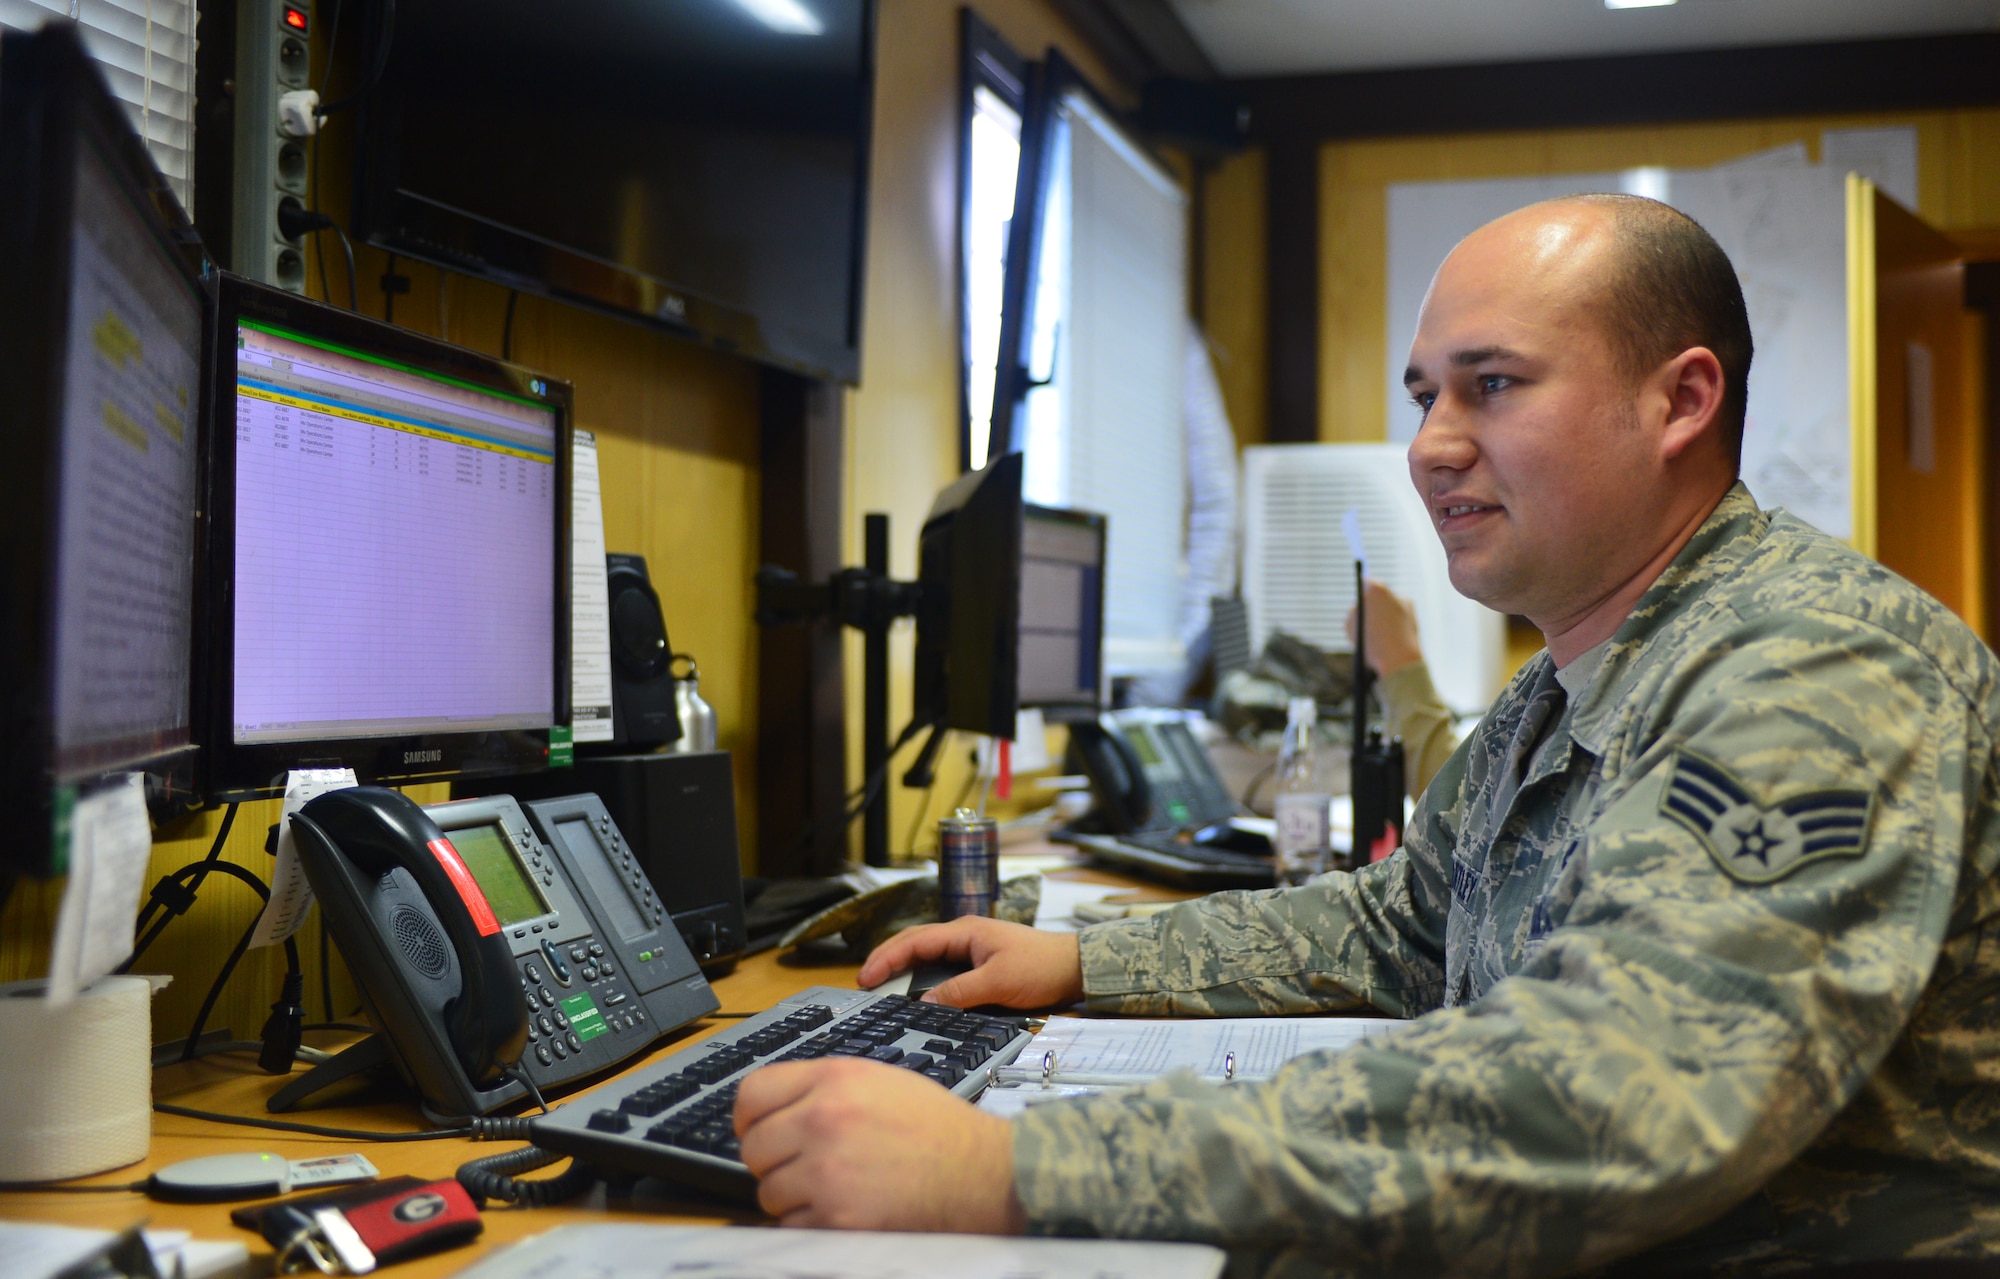 U.S. Air Force Senior Airman David Hartley, a Maintenance Operations Center controller, checks over information in the MOC at Spangdahlem Air Base, Germany, March 25, 2015. Part of the MOC's daily mission is to track the status of all aircraft and equipment on the flight line and coordinate maintenance and logistics support. (U.S. Air Force photo by 2nd Lt Meredith Mulvihill/Released)